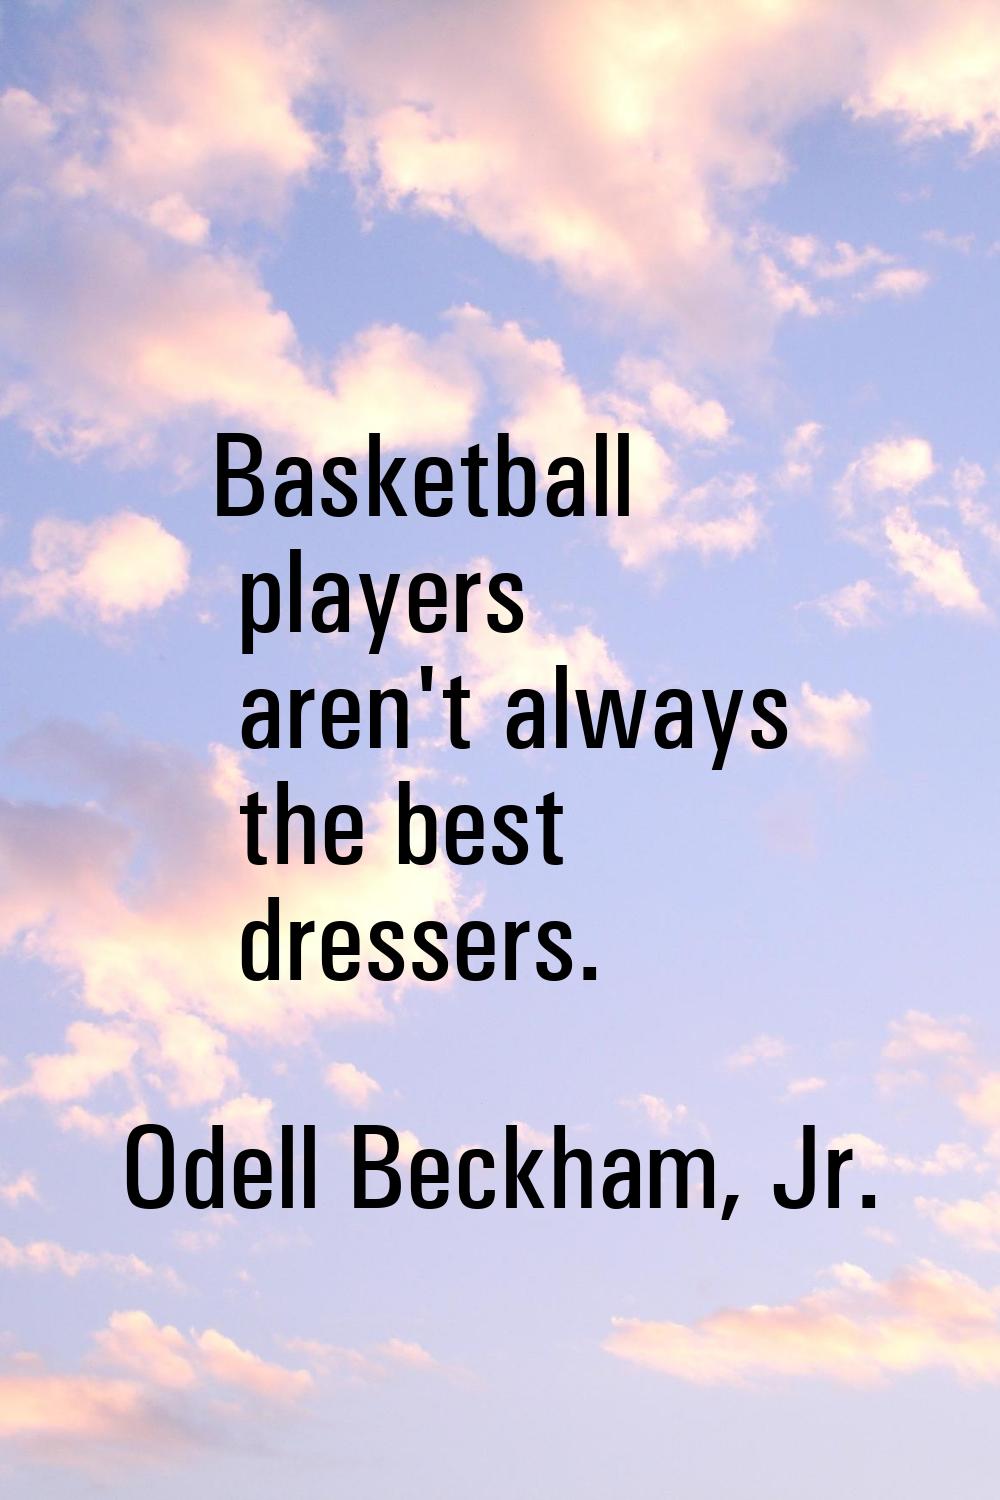 Basketball players aren't always the best dressers.